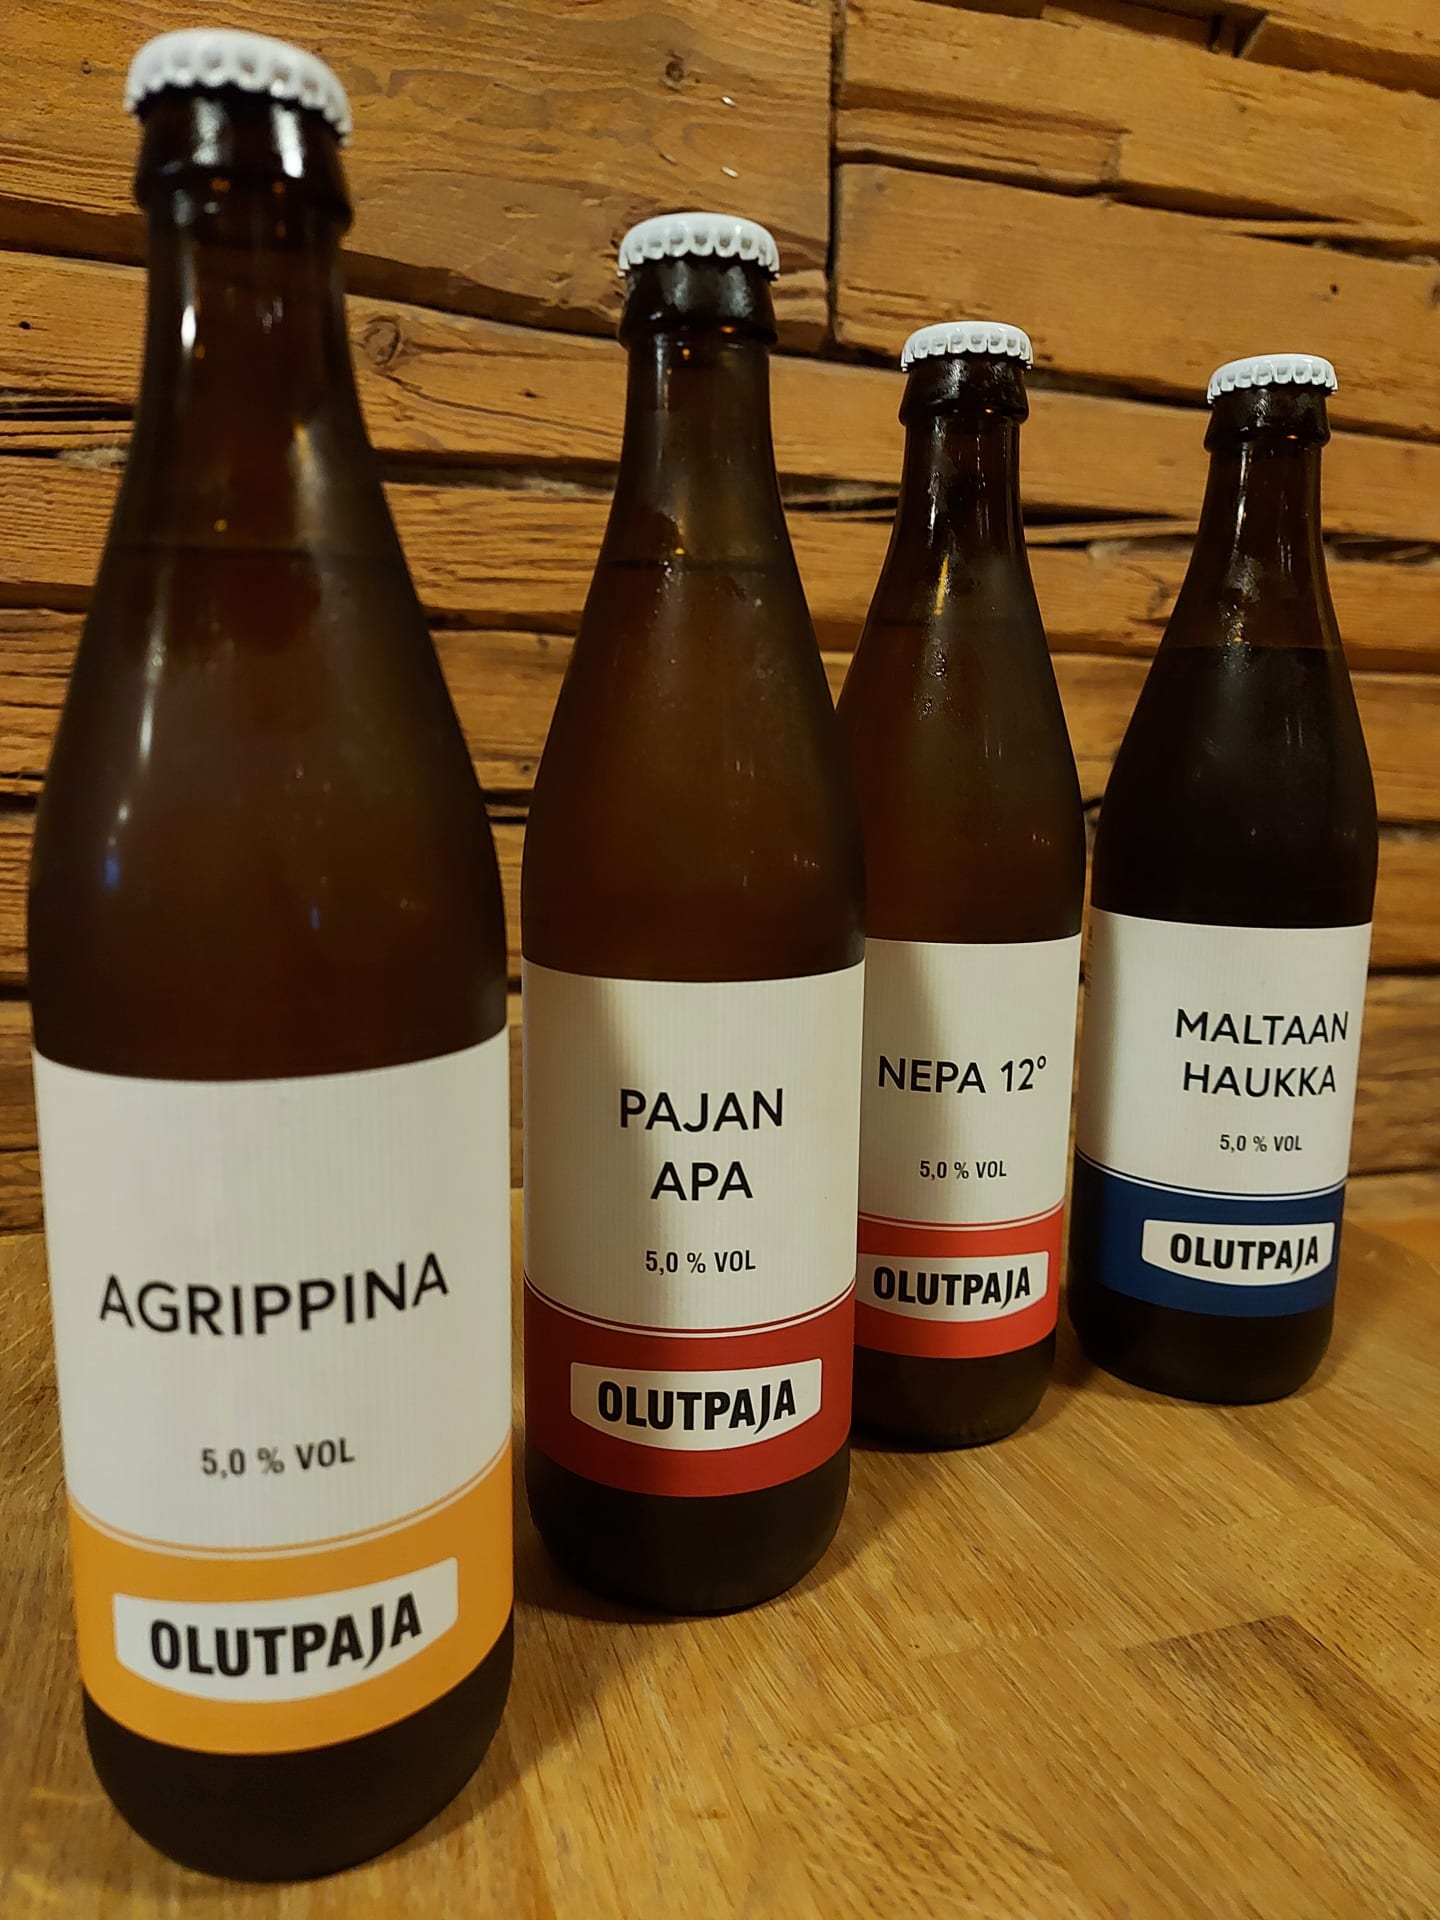 Selection of local beers